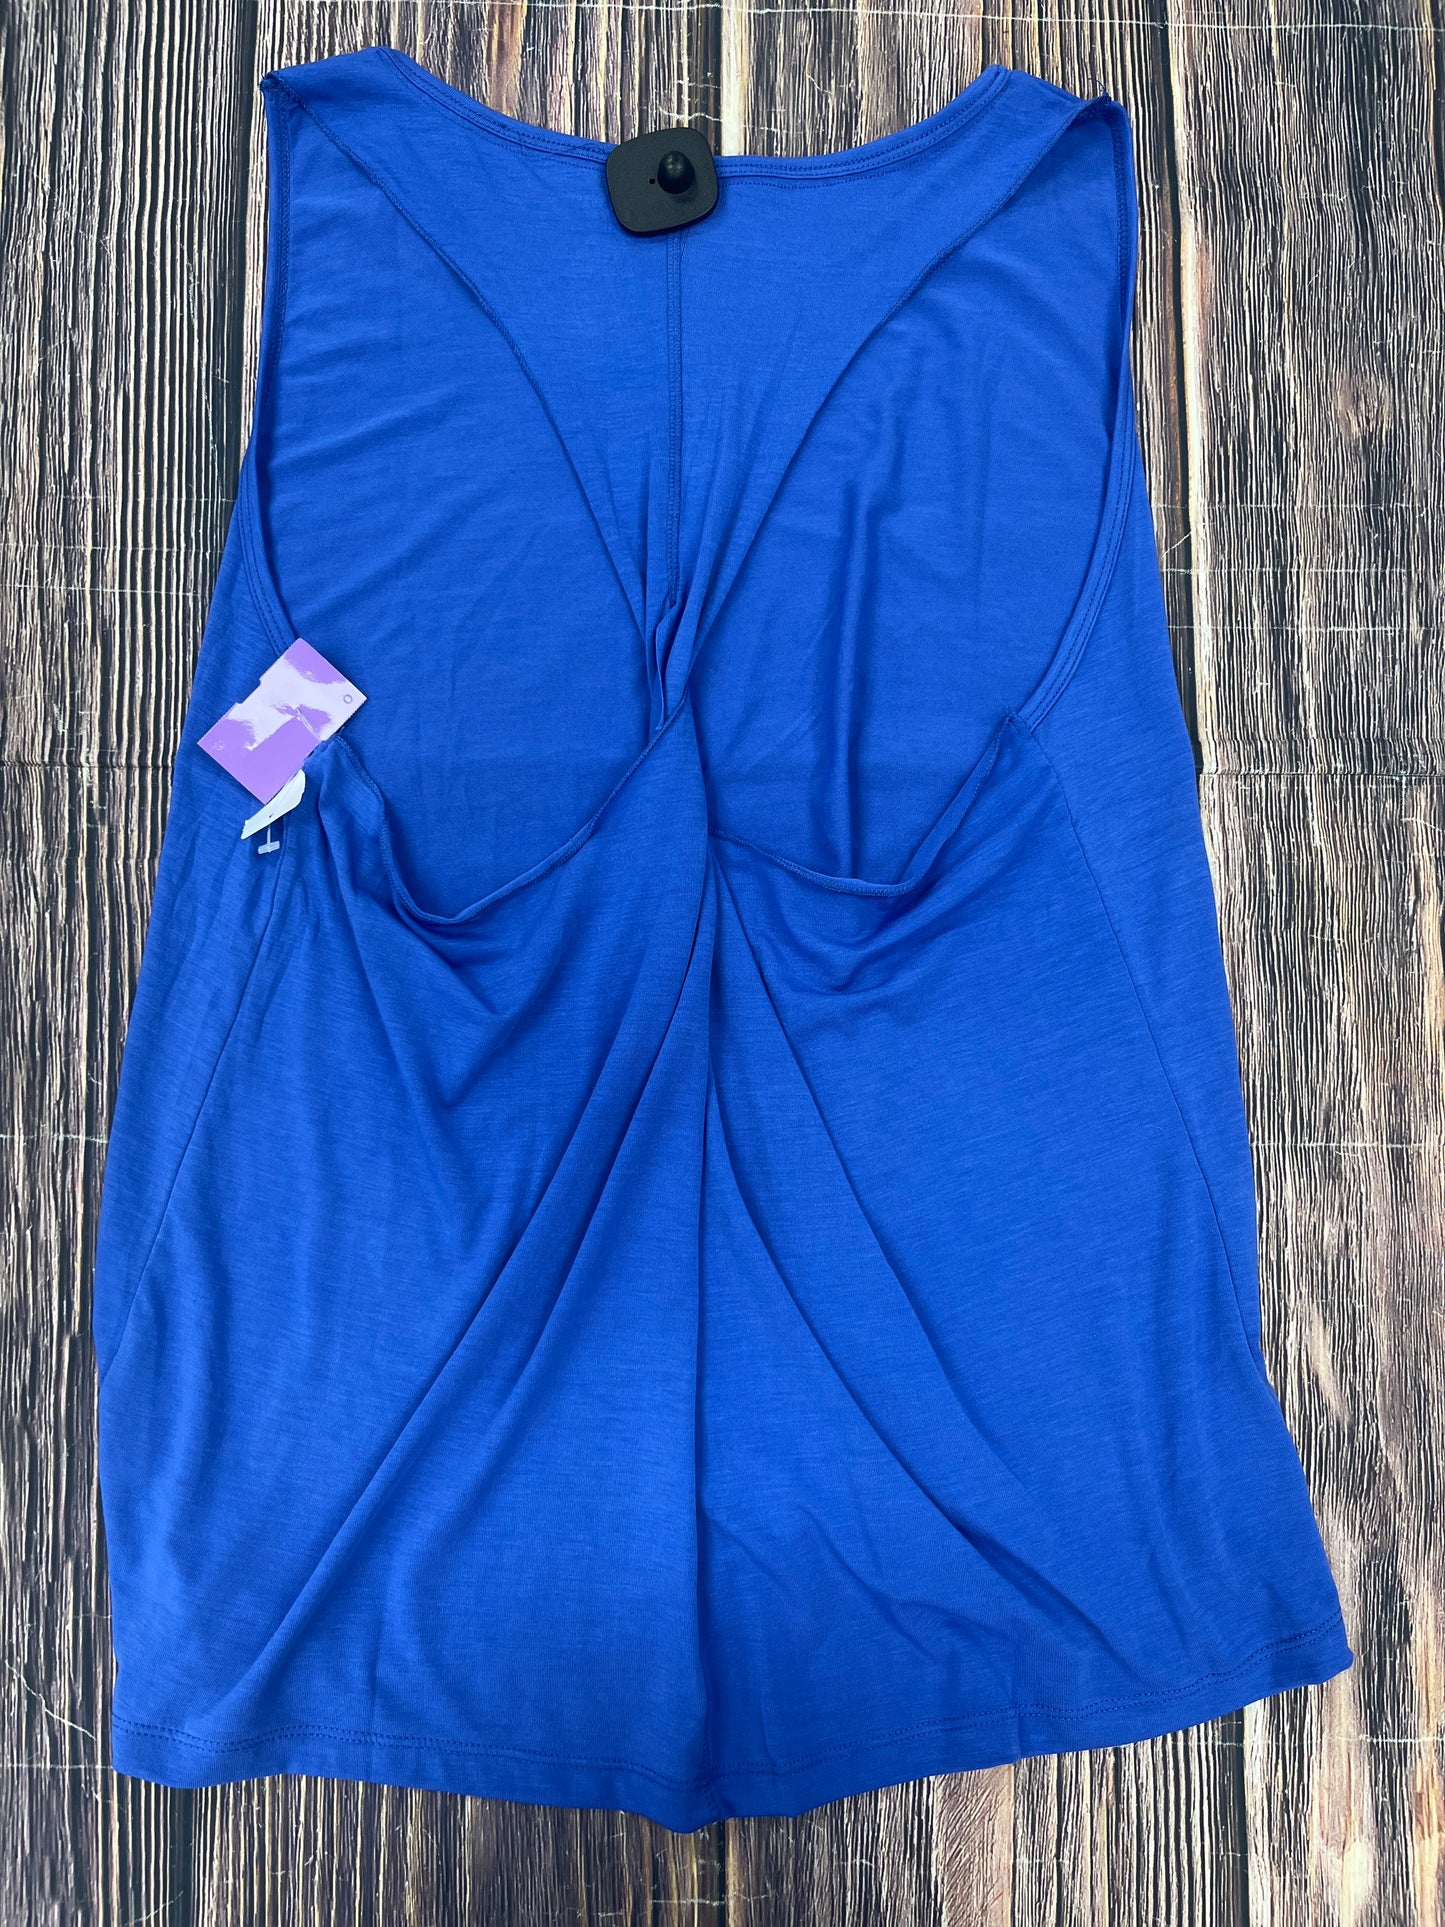 Athletic Tank Top By Nine West  Size: 1x